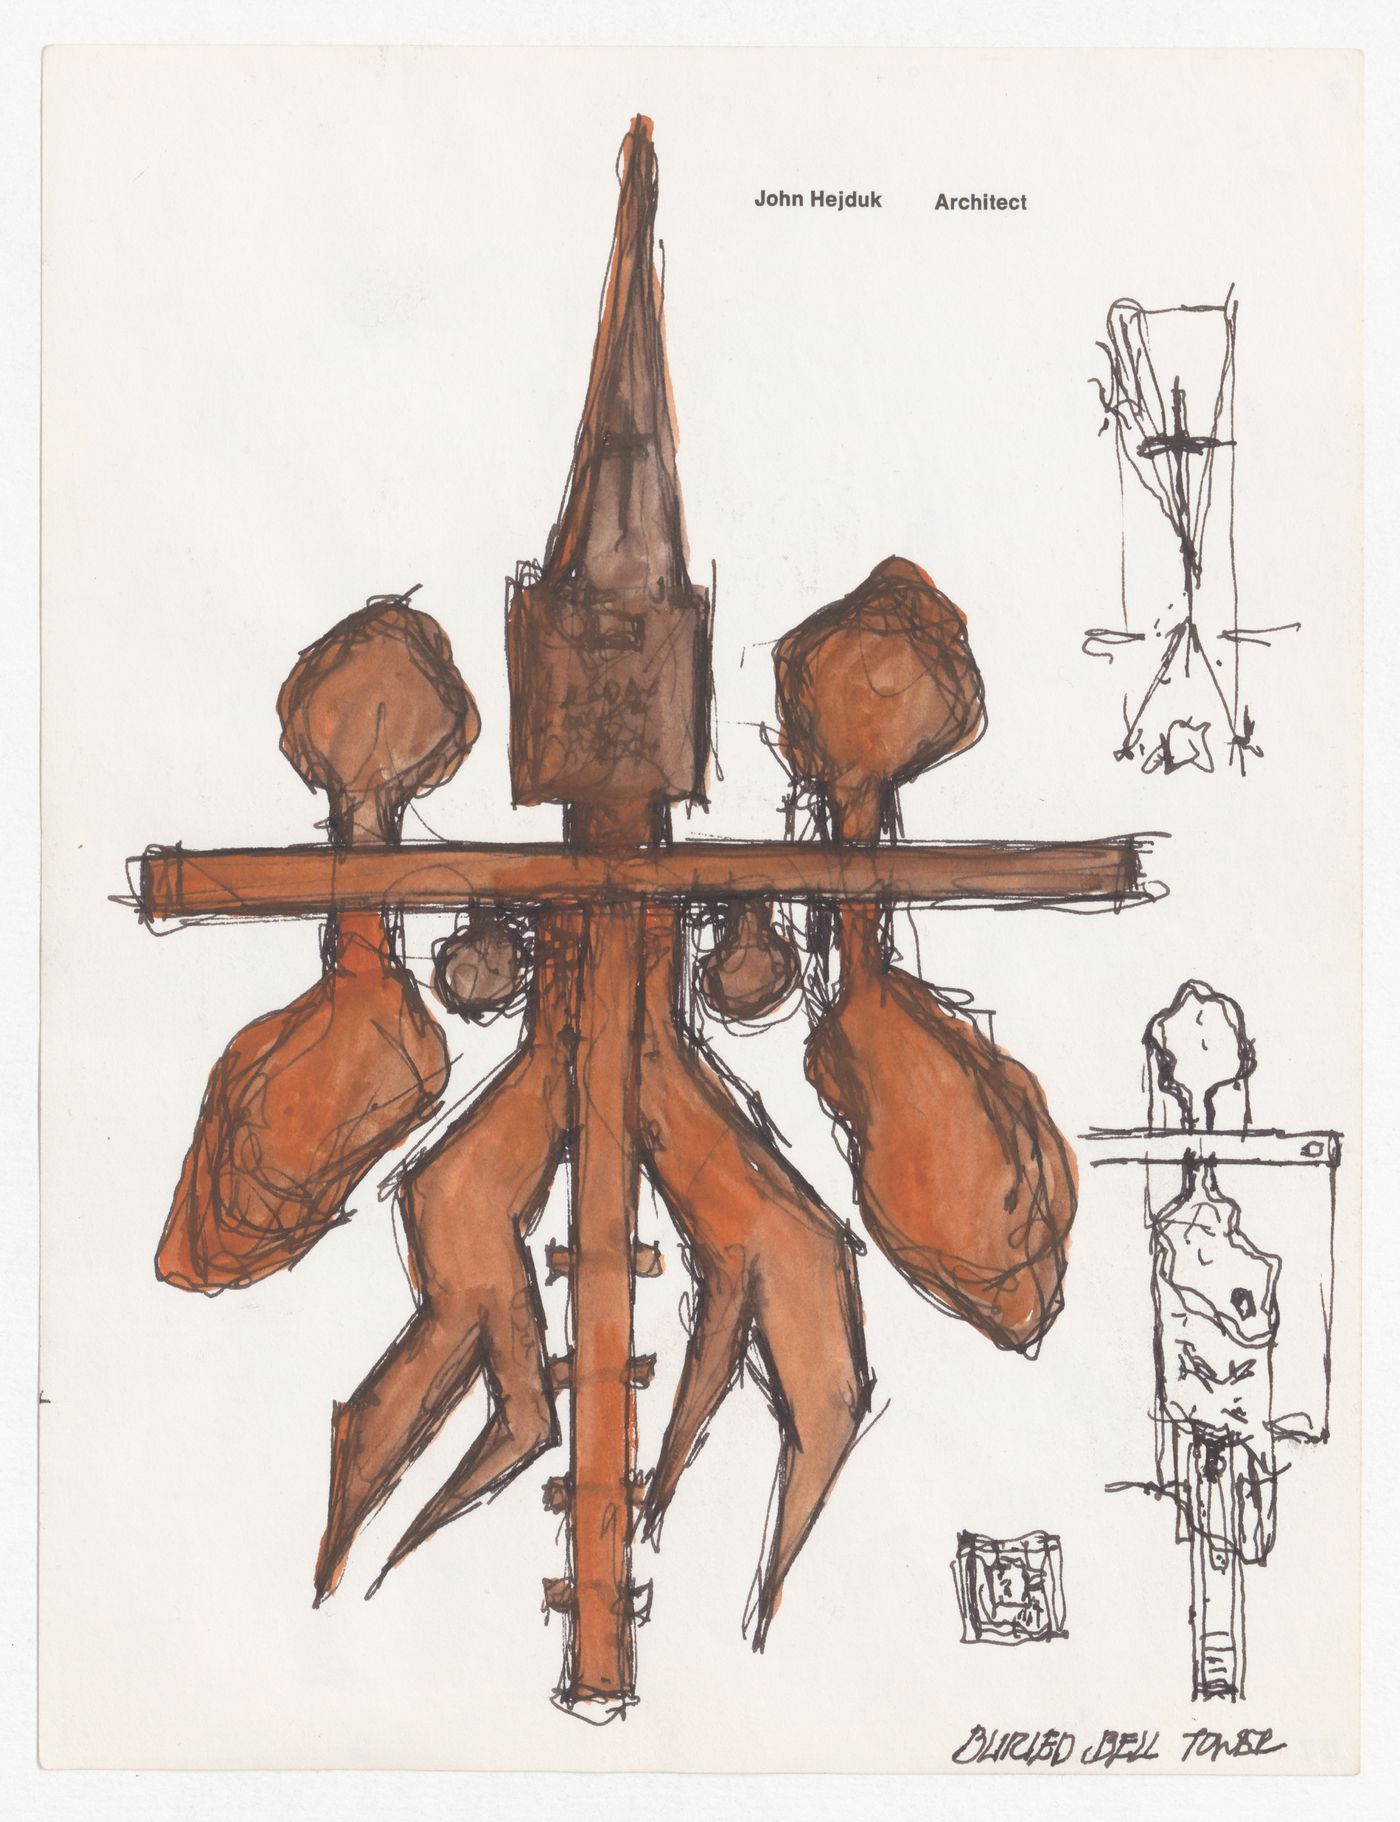 Plan for church complex and sketches (from the series "Pewter Wings, Golden Horns, Stone Veils")